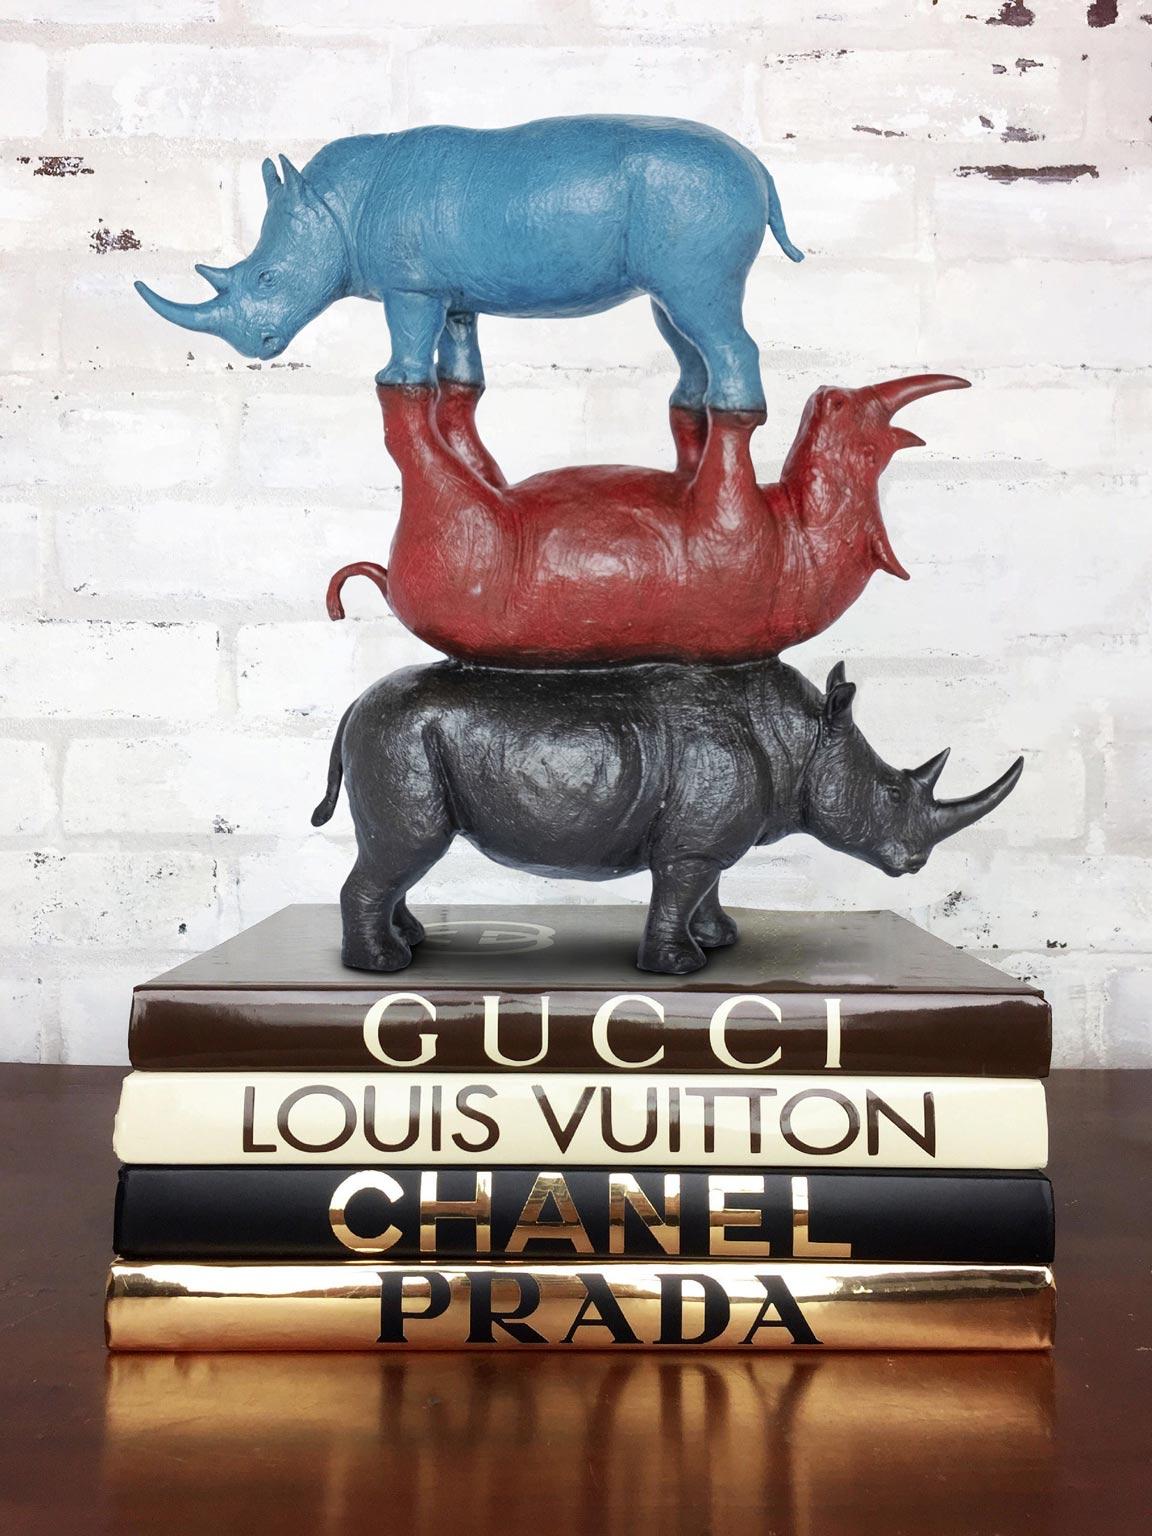 Title: The future was going to be colourful and bright
Authentic bronze sculpture
Limited Edition

World Famous Contemporary Artists: Husband and wife team, Gillie and Marc, are New York and Sydney-based contemporary artists who collaborate to